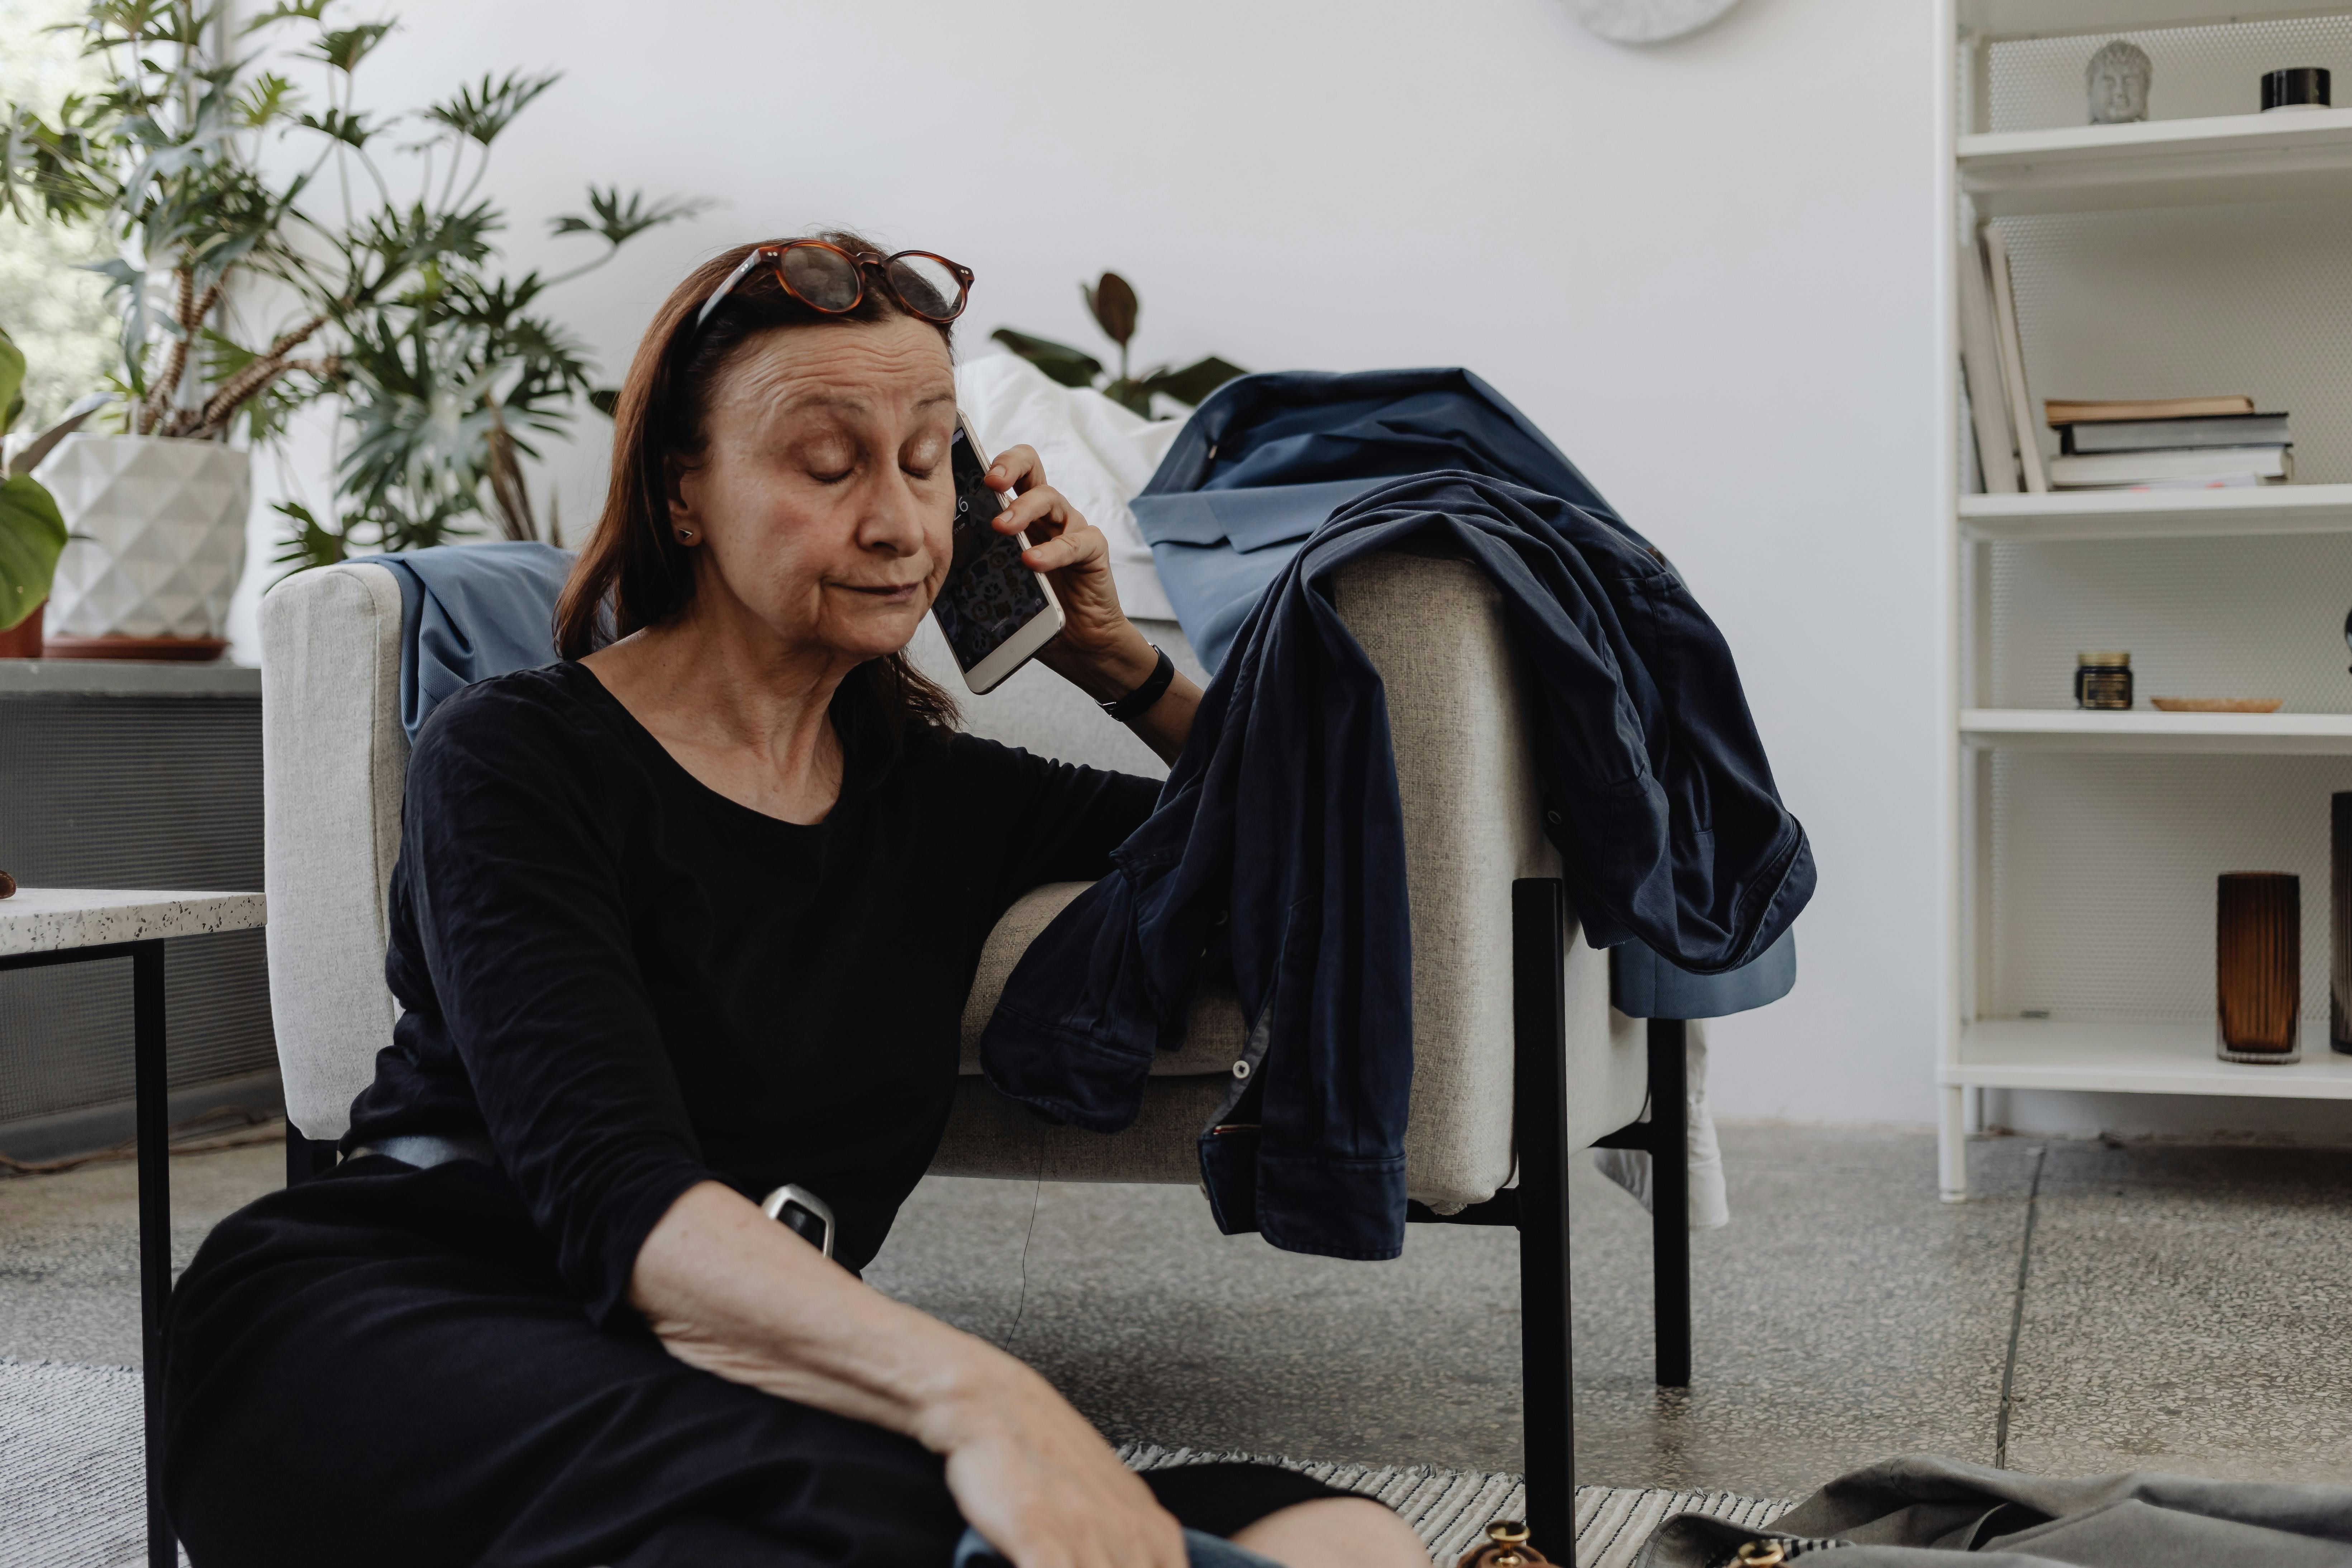 A senior woman with serious expression on phone call | Source: Pexels